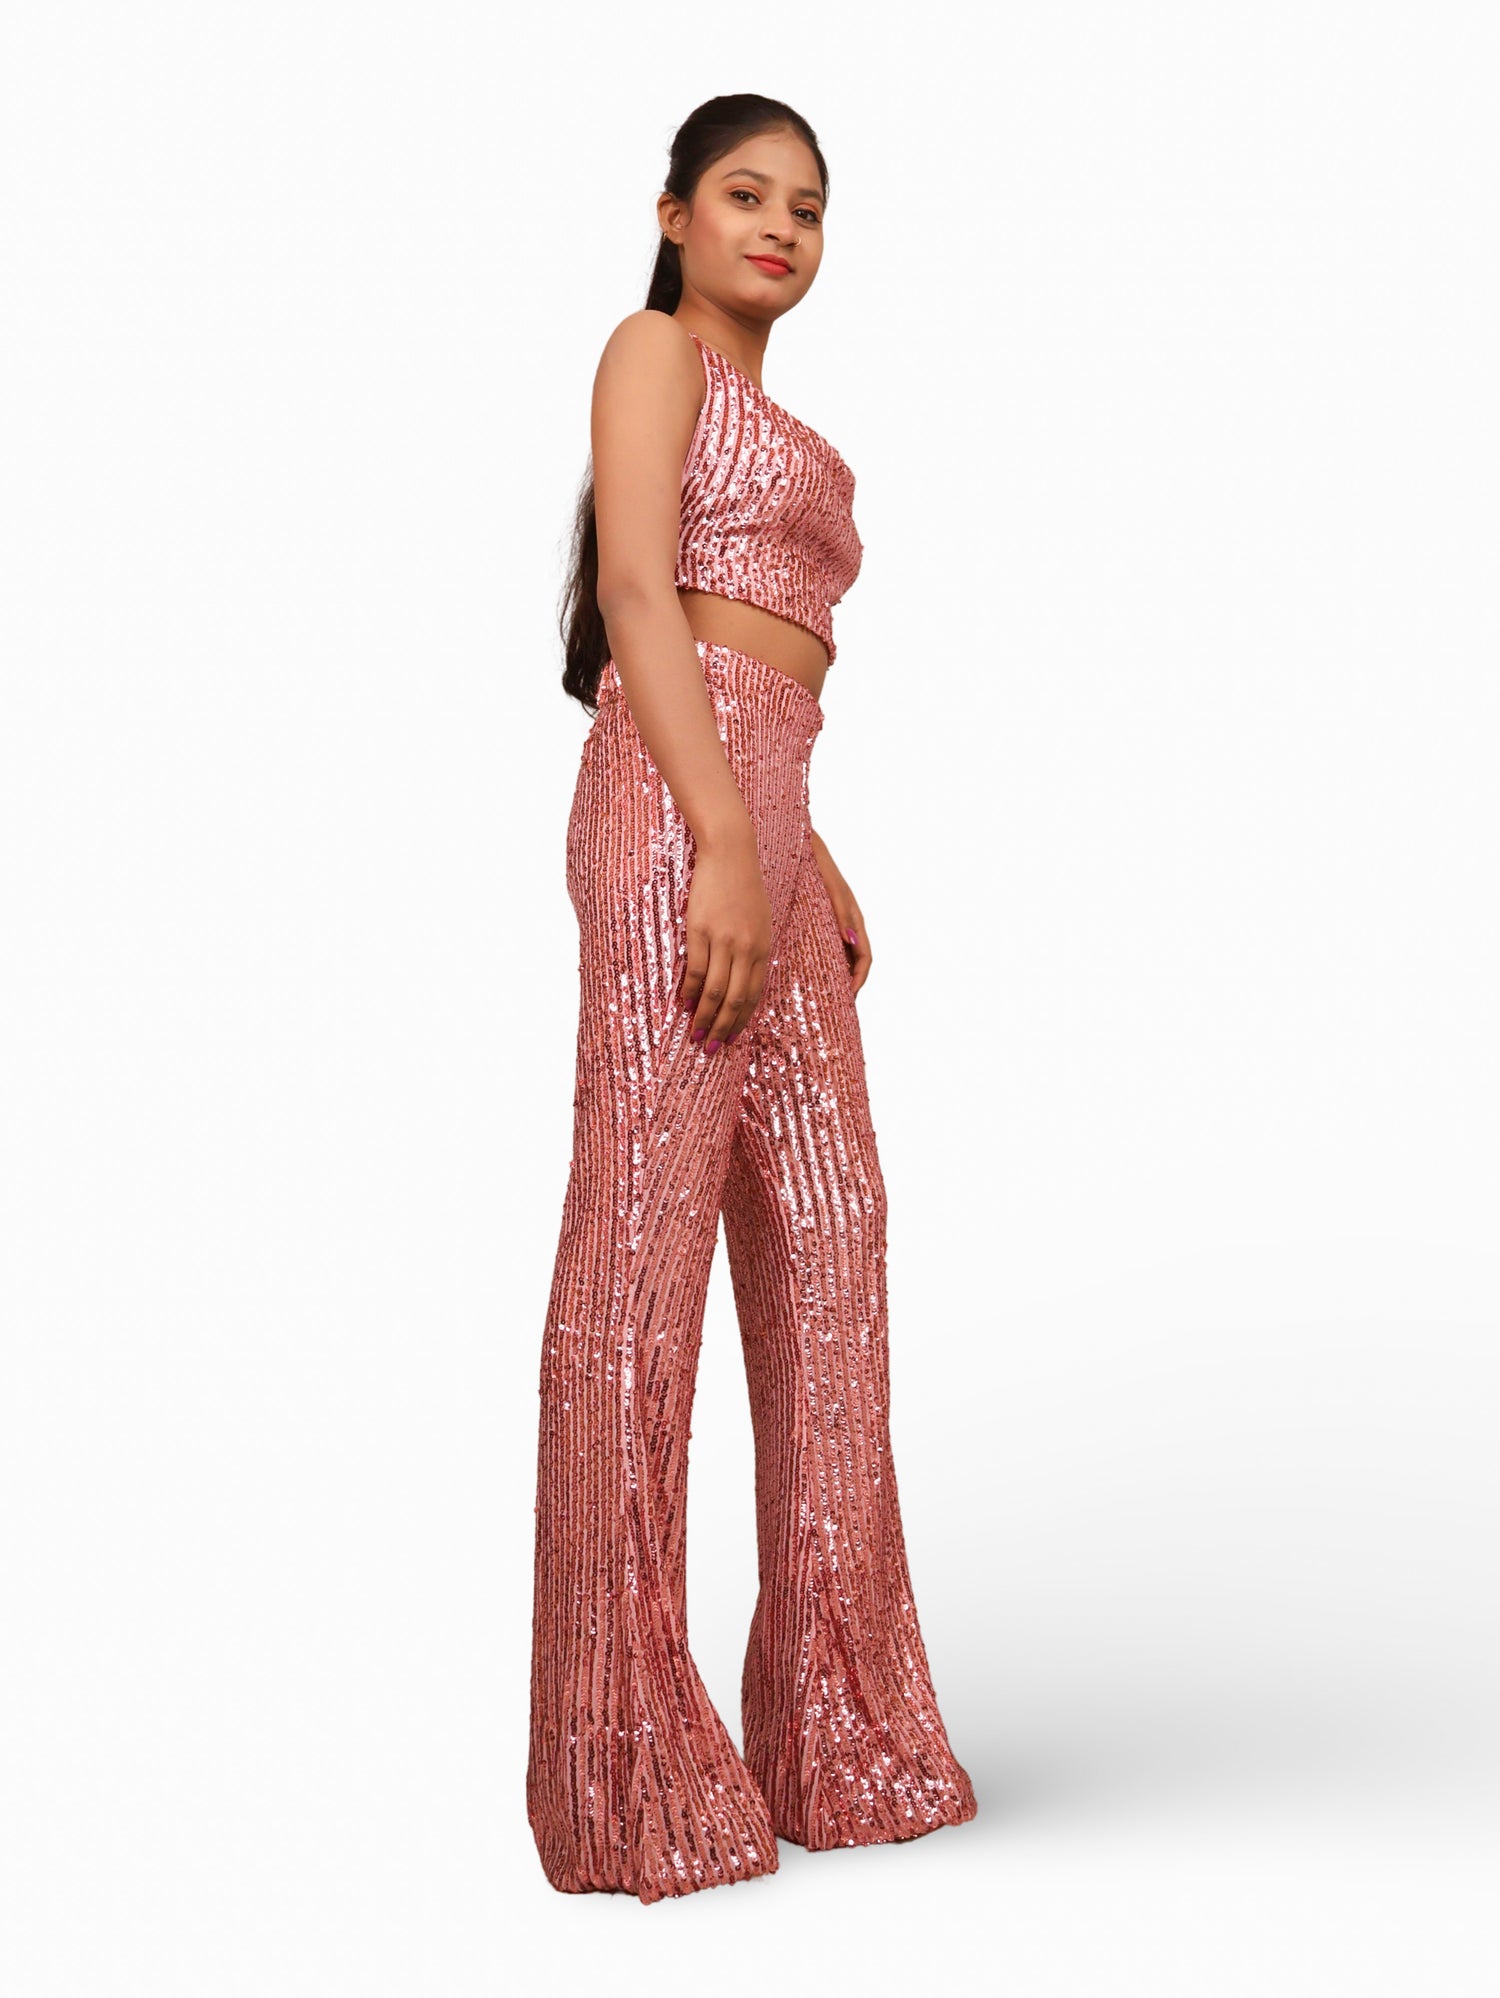 Sequins Spaghetti Neck Co-Ord Set by Shreekama Pink Dress for Party Festival Wedding Occasion in Noida